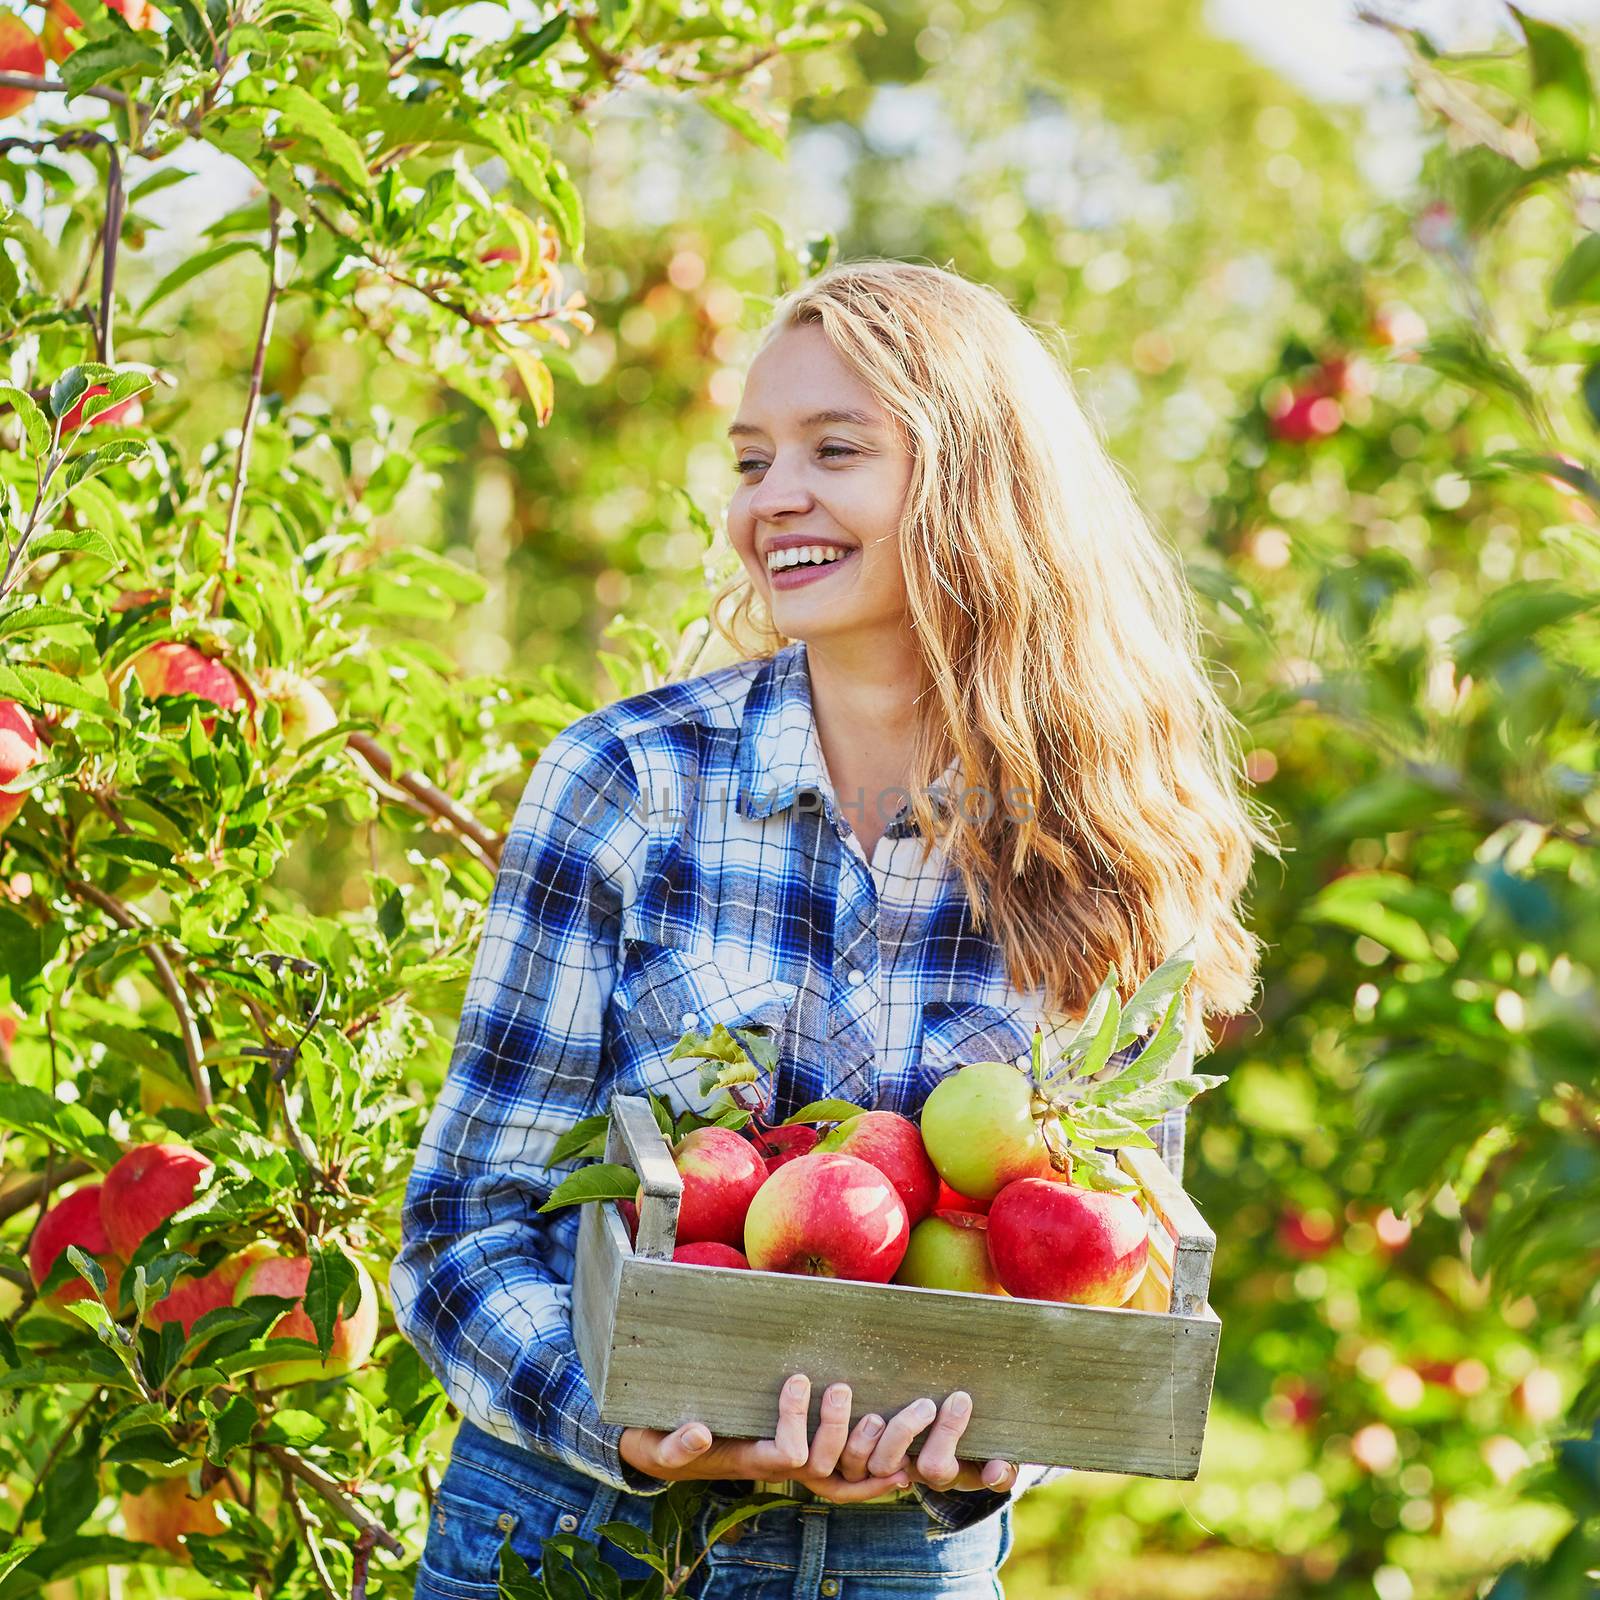 Woman holding crate with ripe red apples on farm. Autumn, harvest and gardening concept